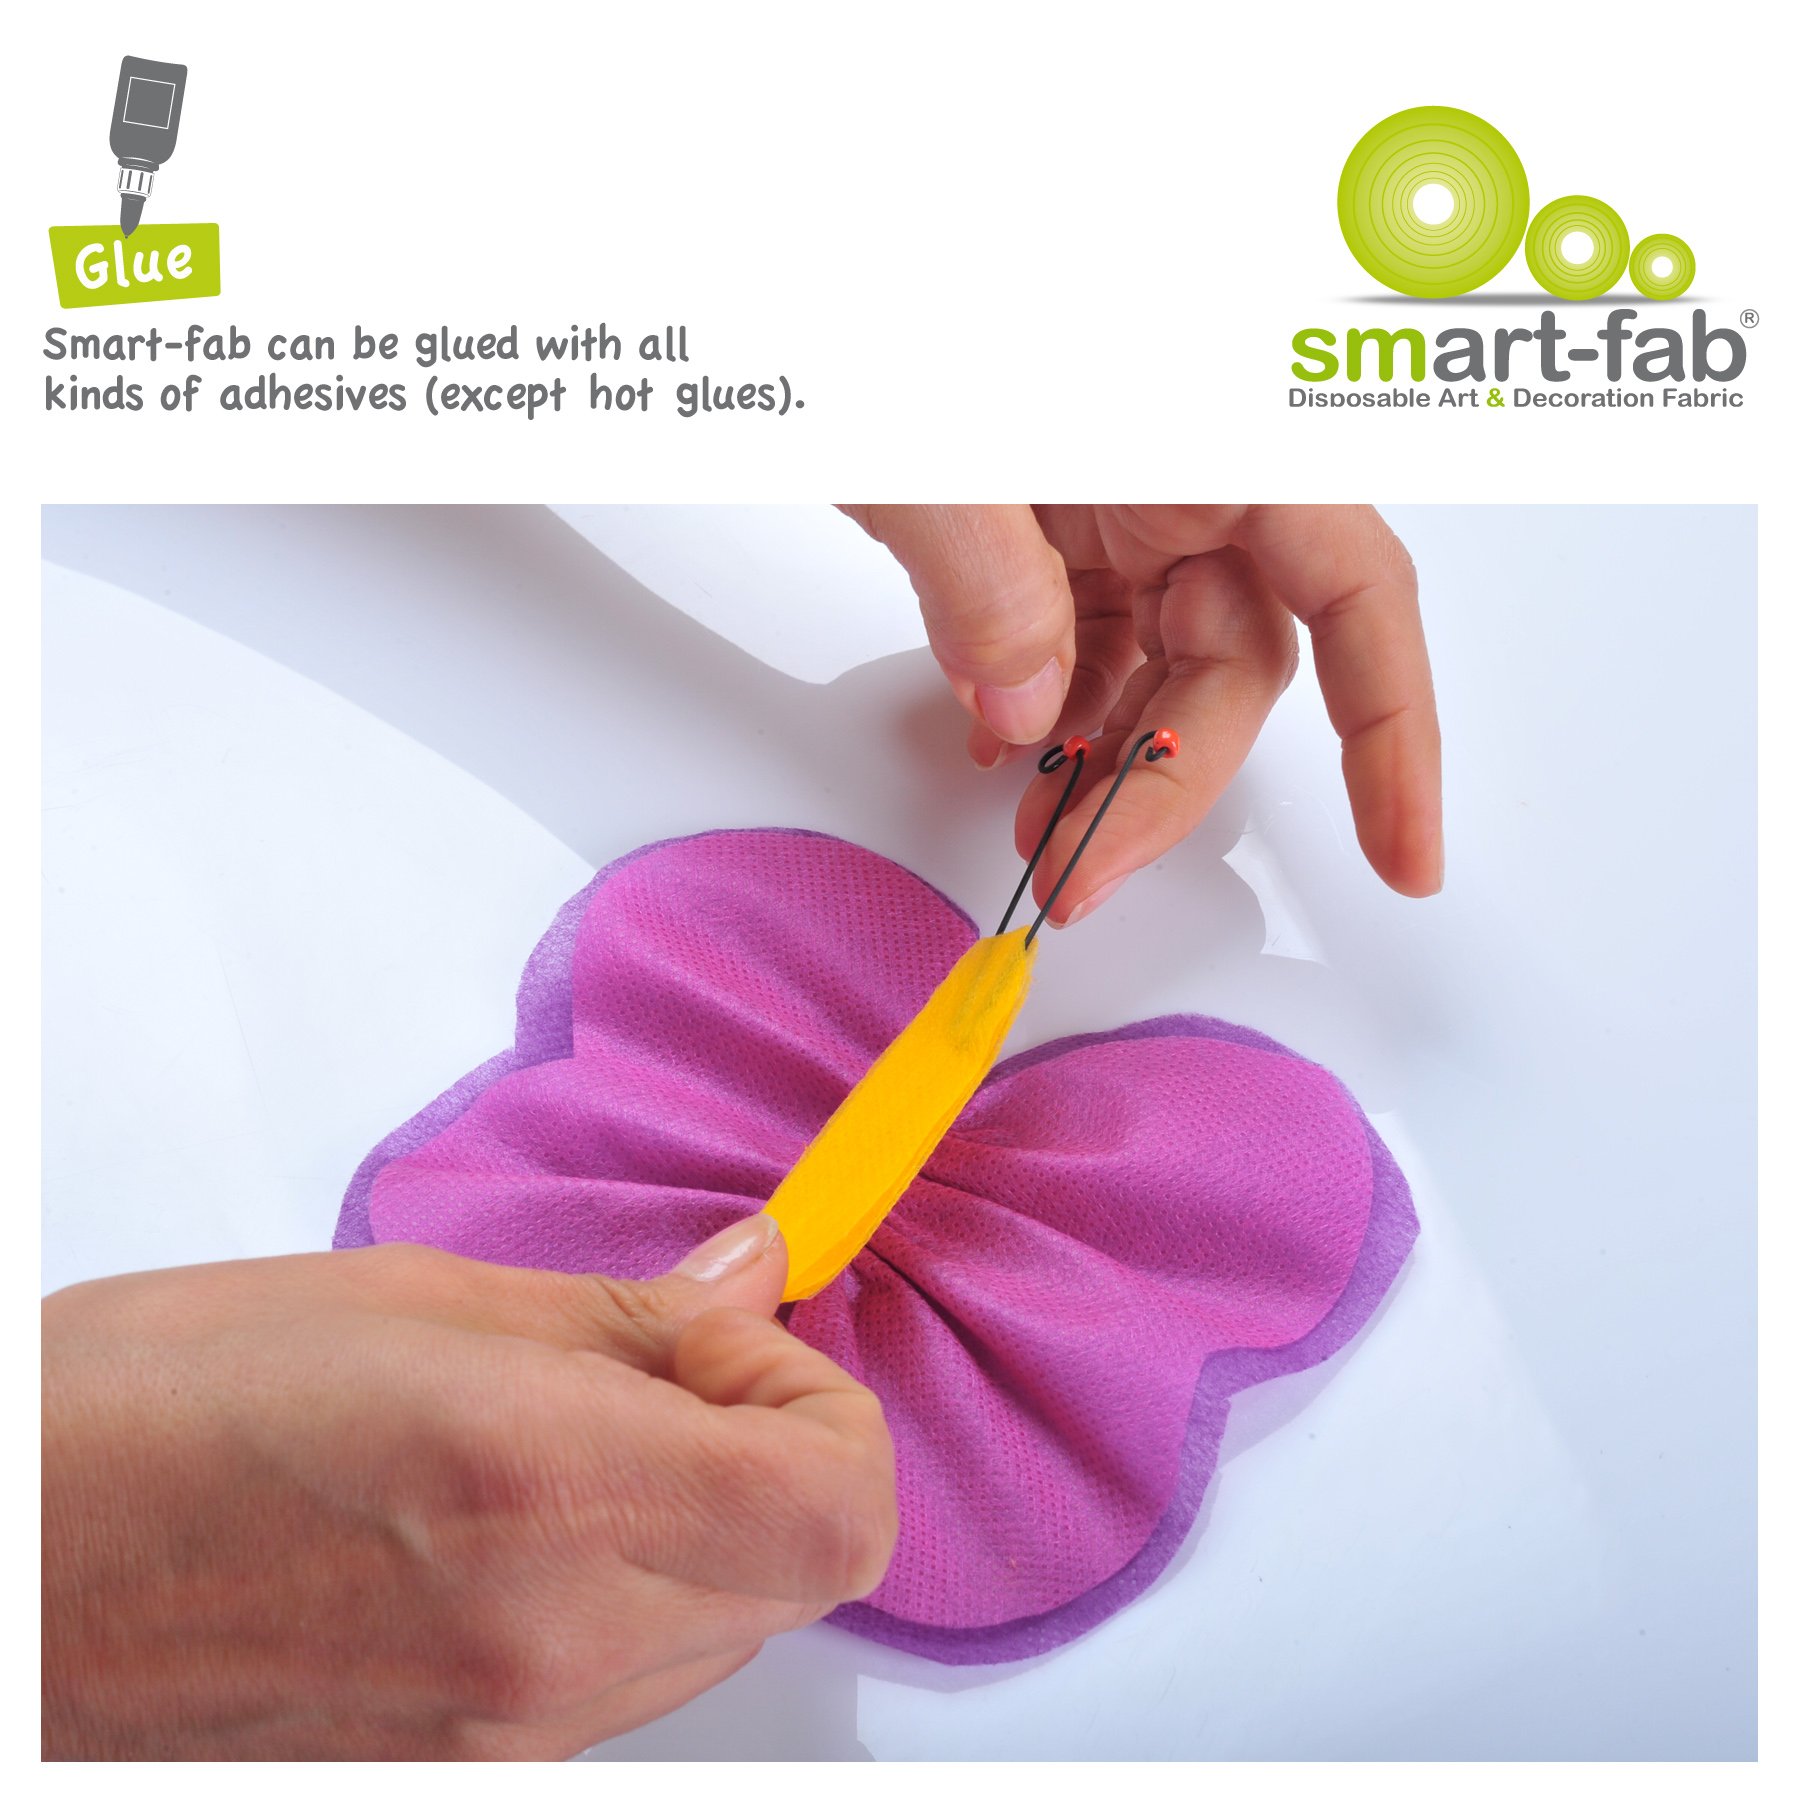 Smart-Fab Disposable Fabric, 12 x 18 Sheets, Assorted, 270/Pack, Perfect for Schools, Classrooms, Crafts, Art, Bulletin Boards, Sew, Draw, Paint it, Unique Non Woven Material (SFB238121827099)